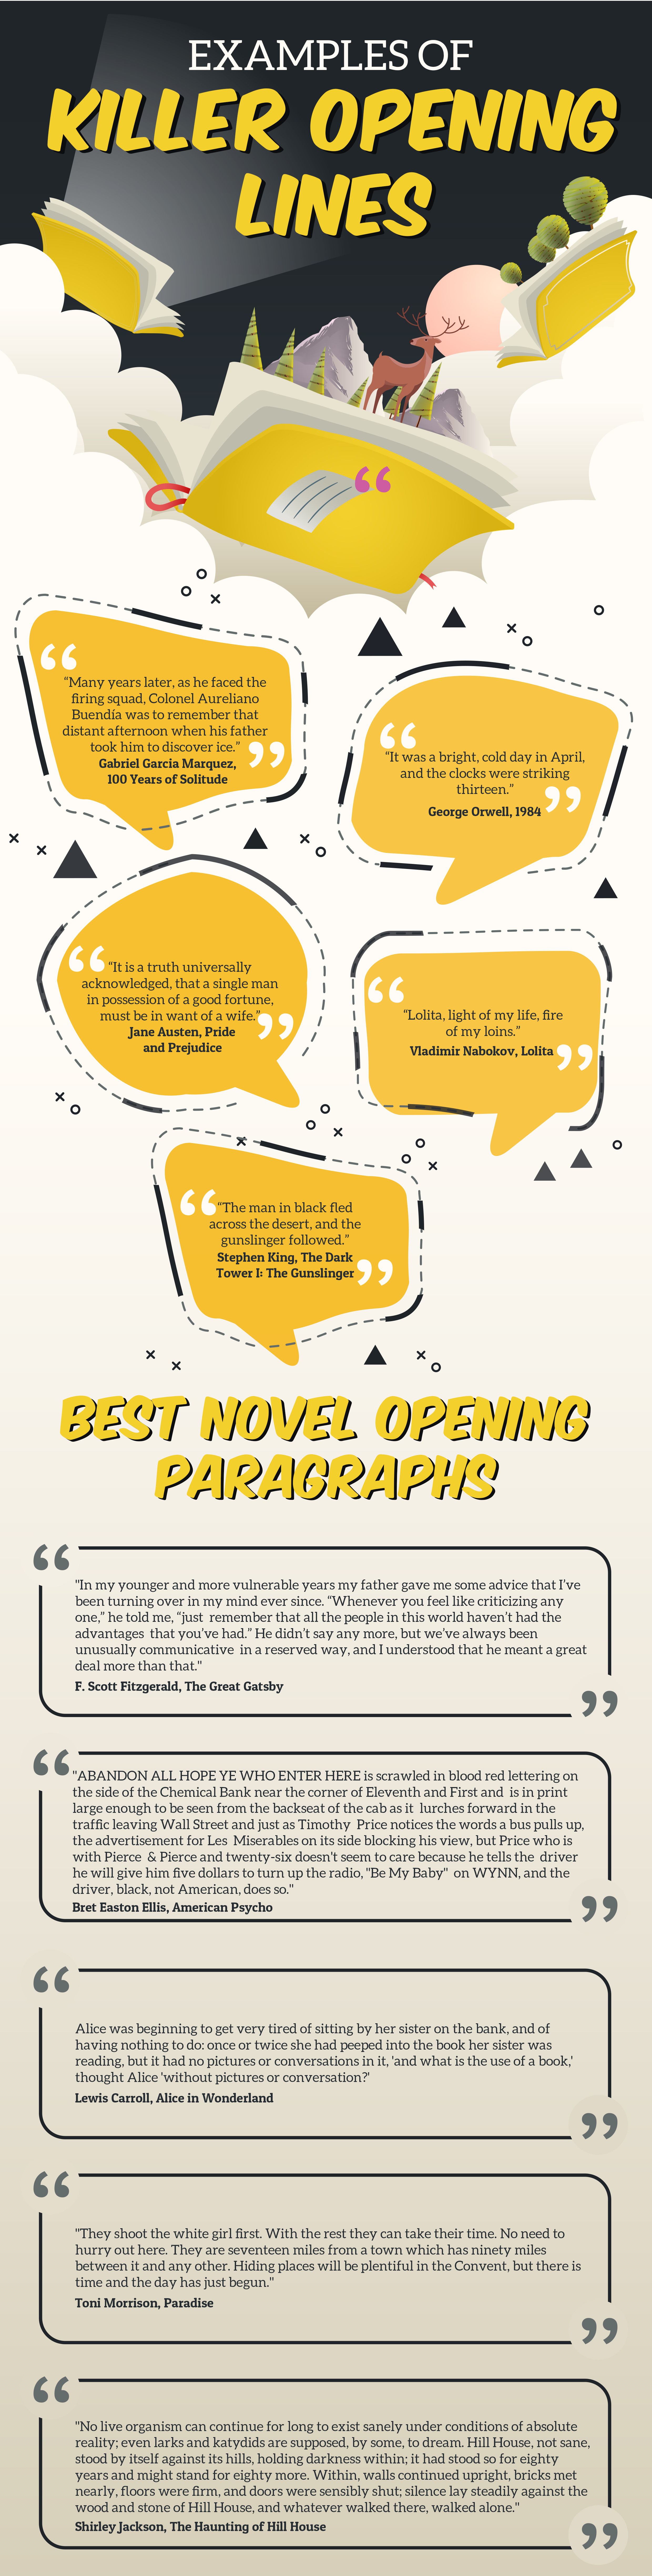 best opening lines and paragraphs infographic